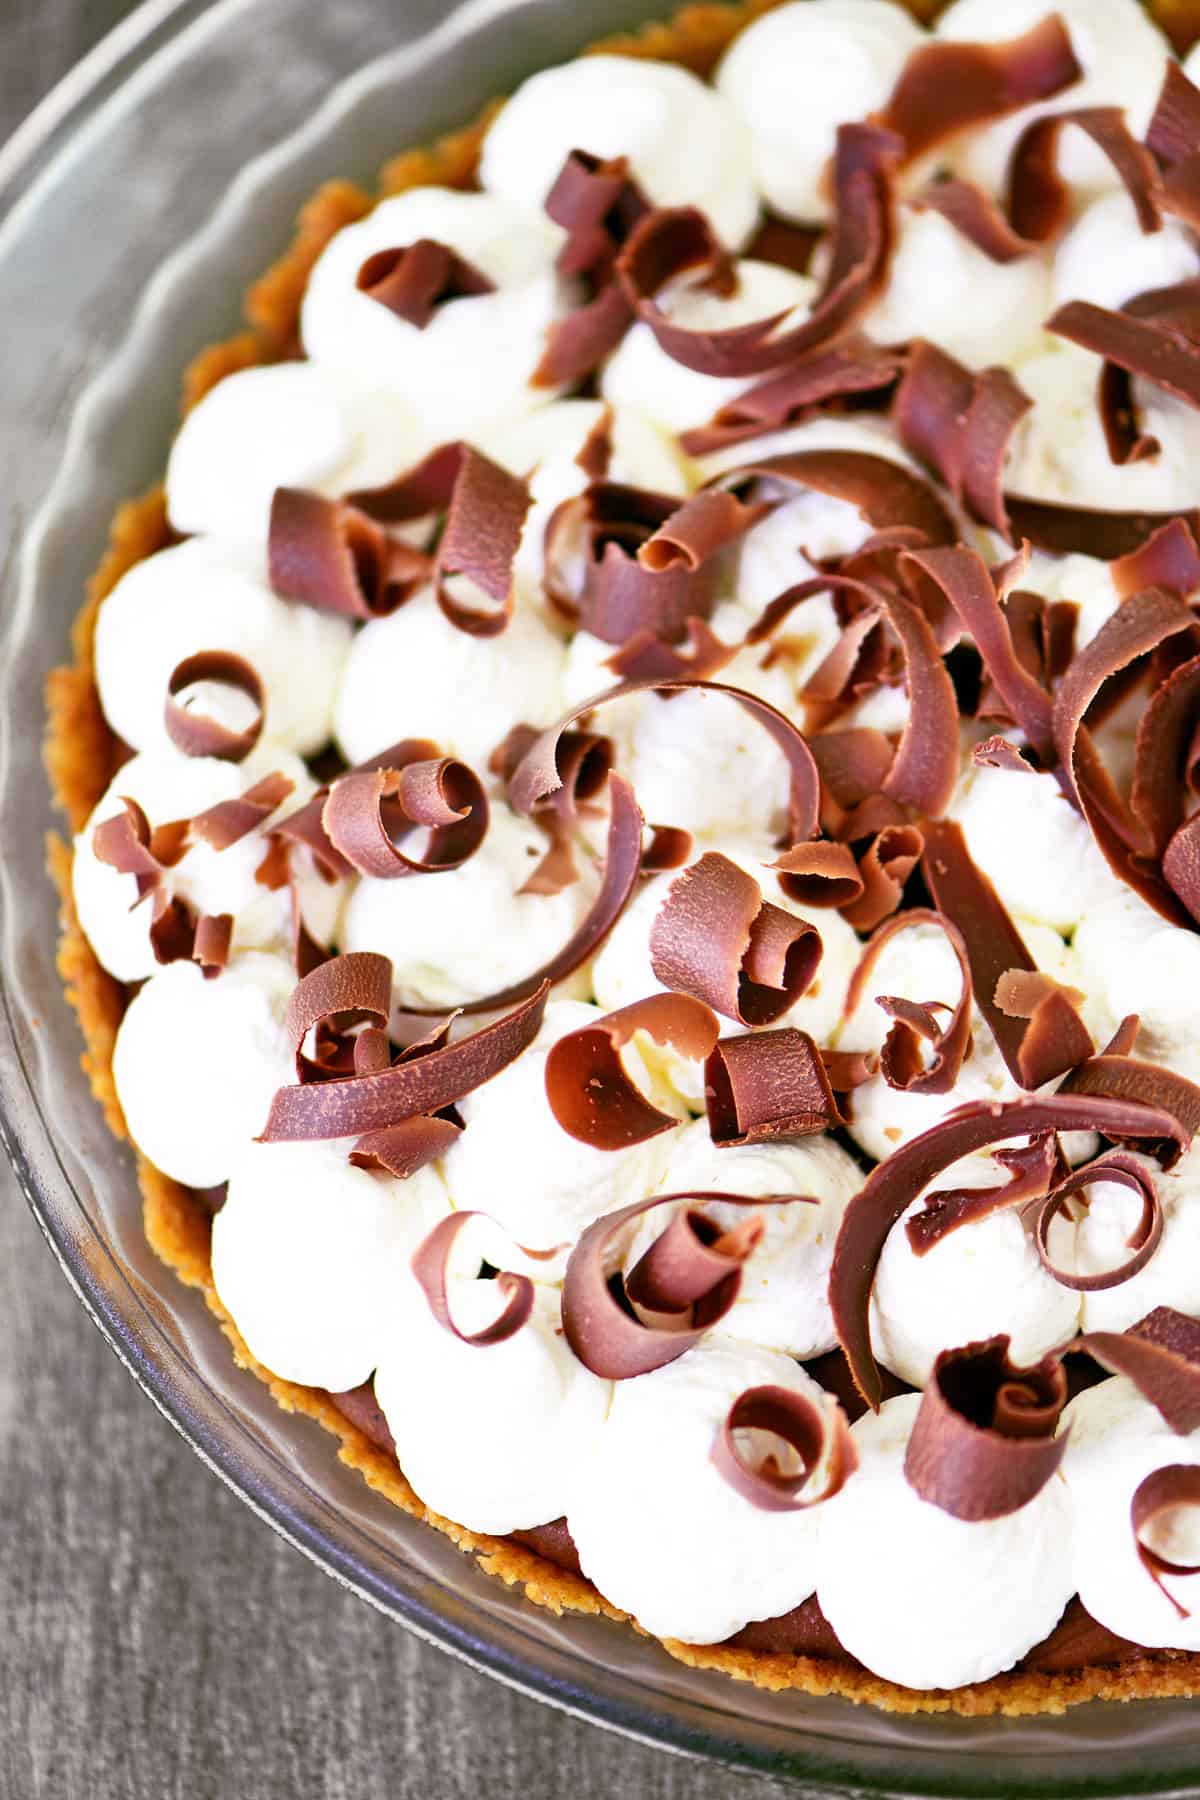 A french silk pie with whipped cream and chocolate curls.